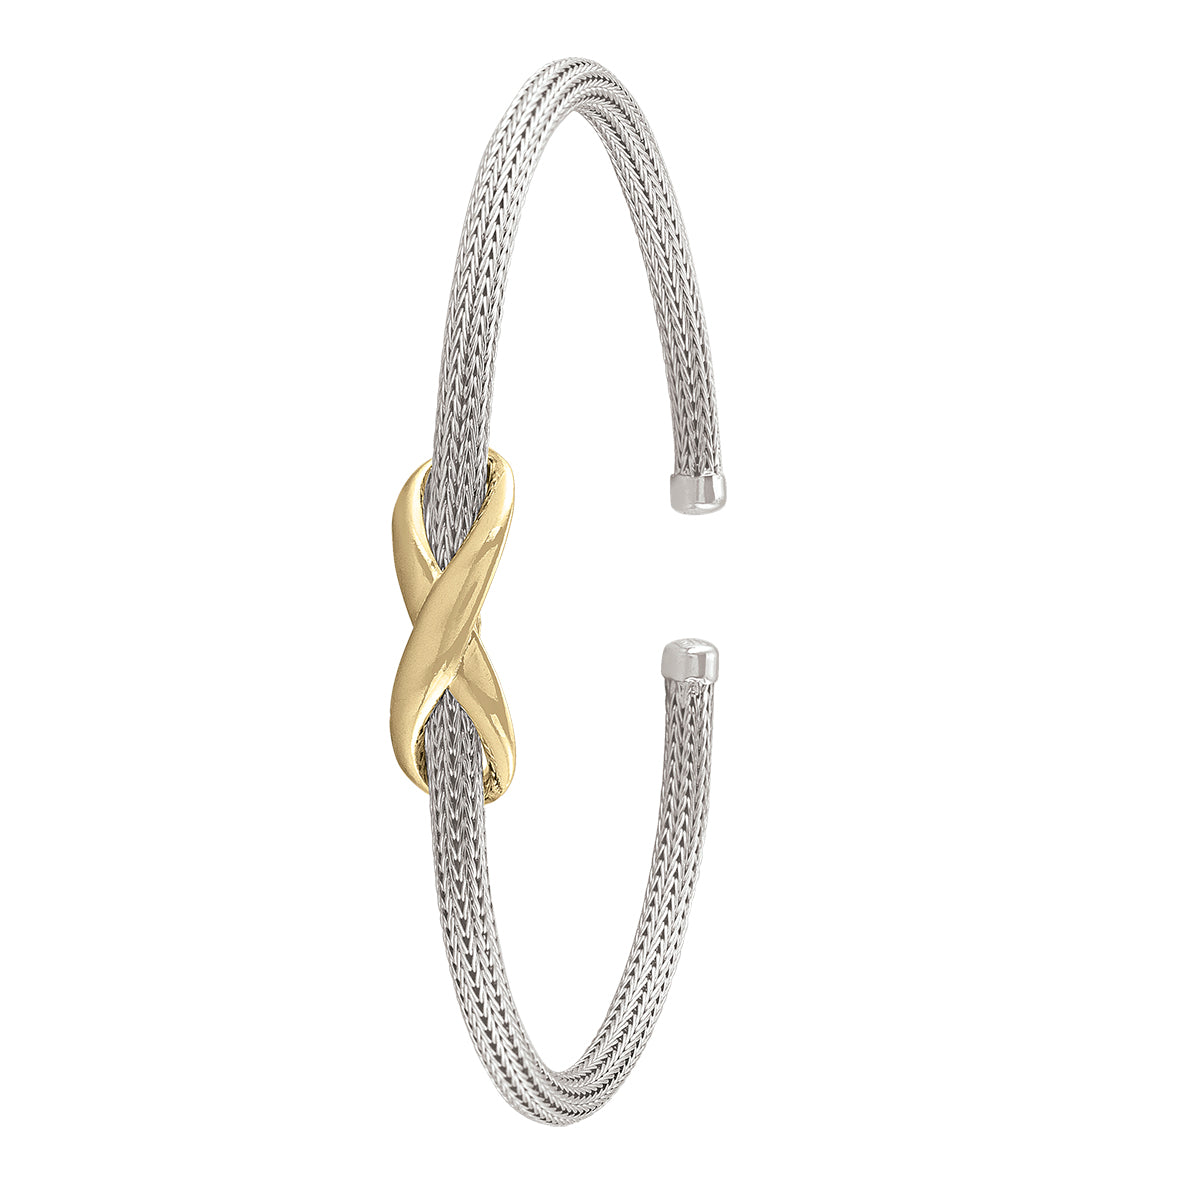 BANGLES STERLING SILVER YELLOW GOLD AND RHODIUM "X" 